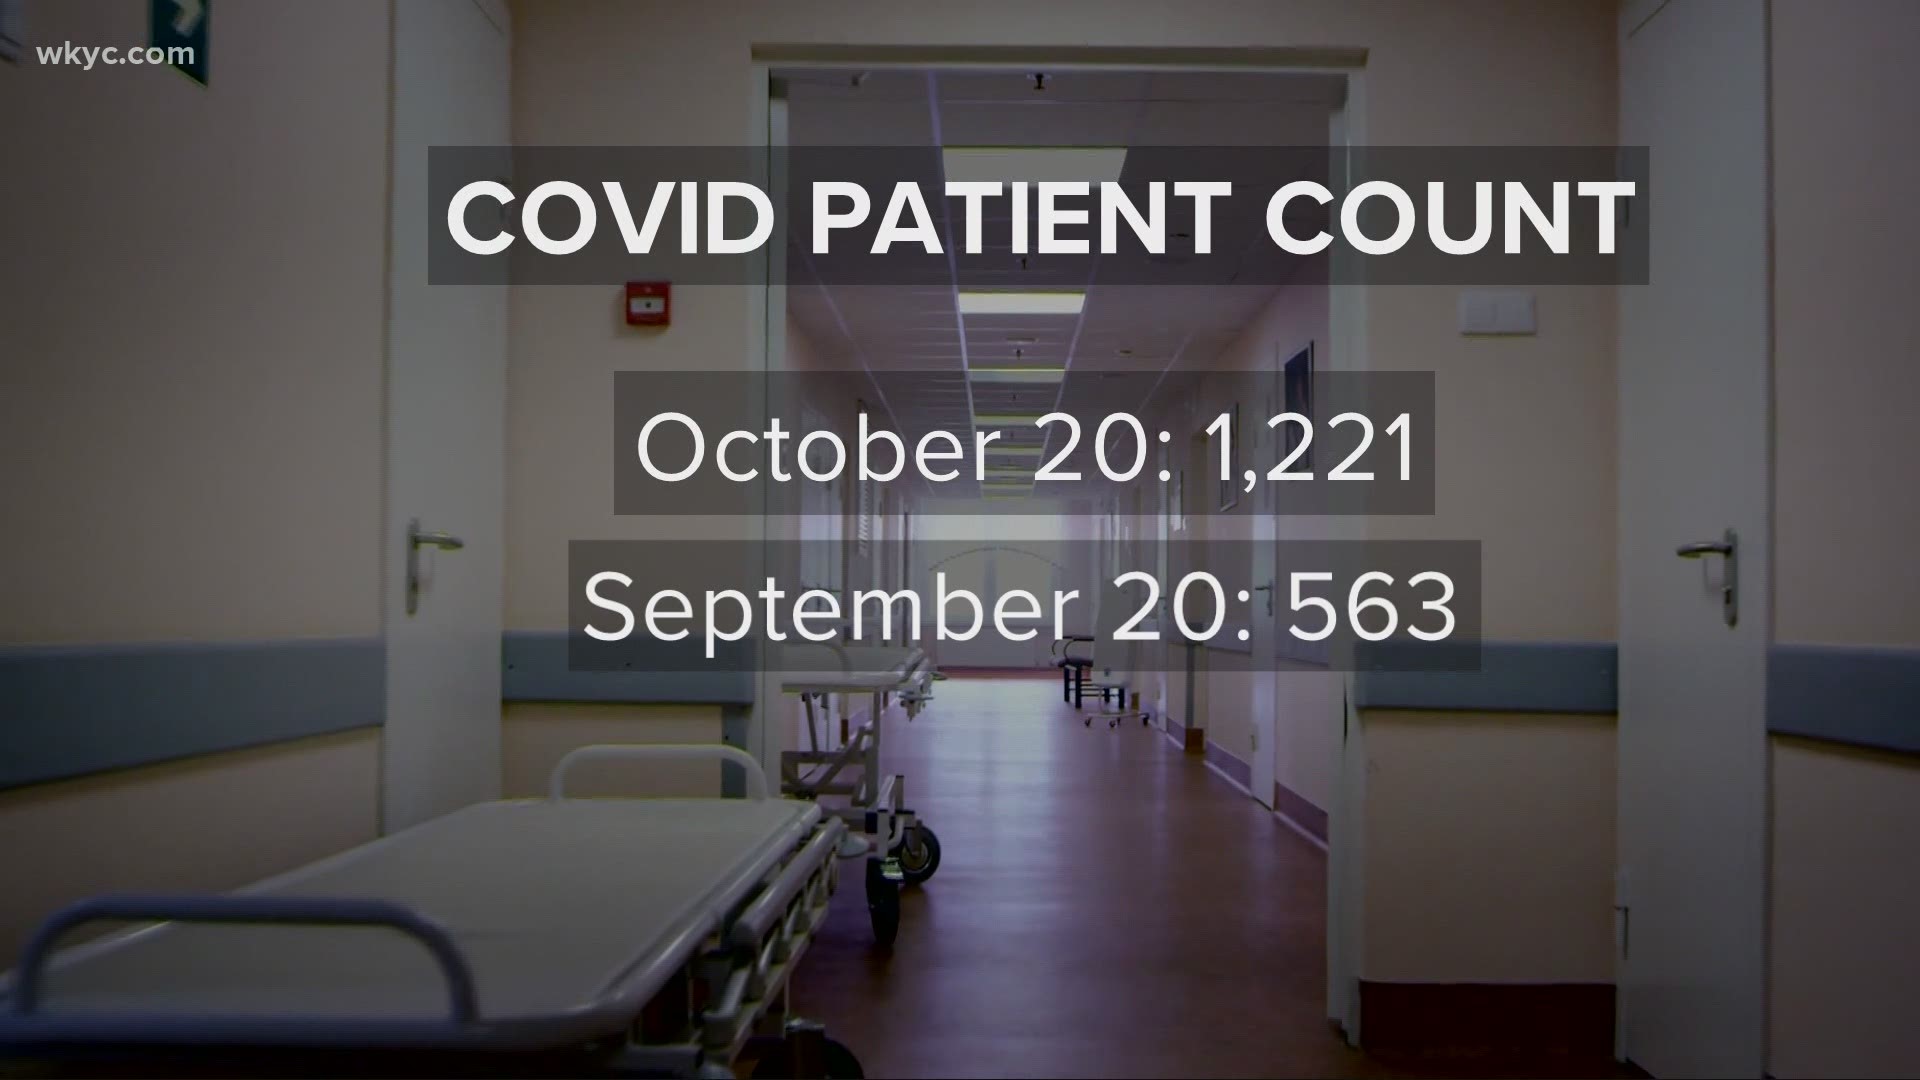 The state currently has more COVID-19 patients in hospital beds that at any time since the pandemic began. Lynna Lai reports.